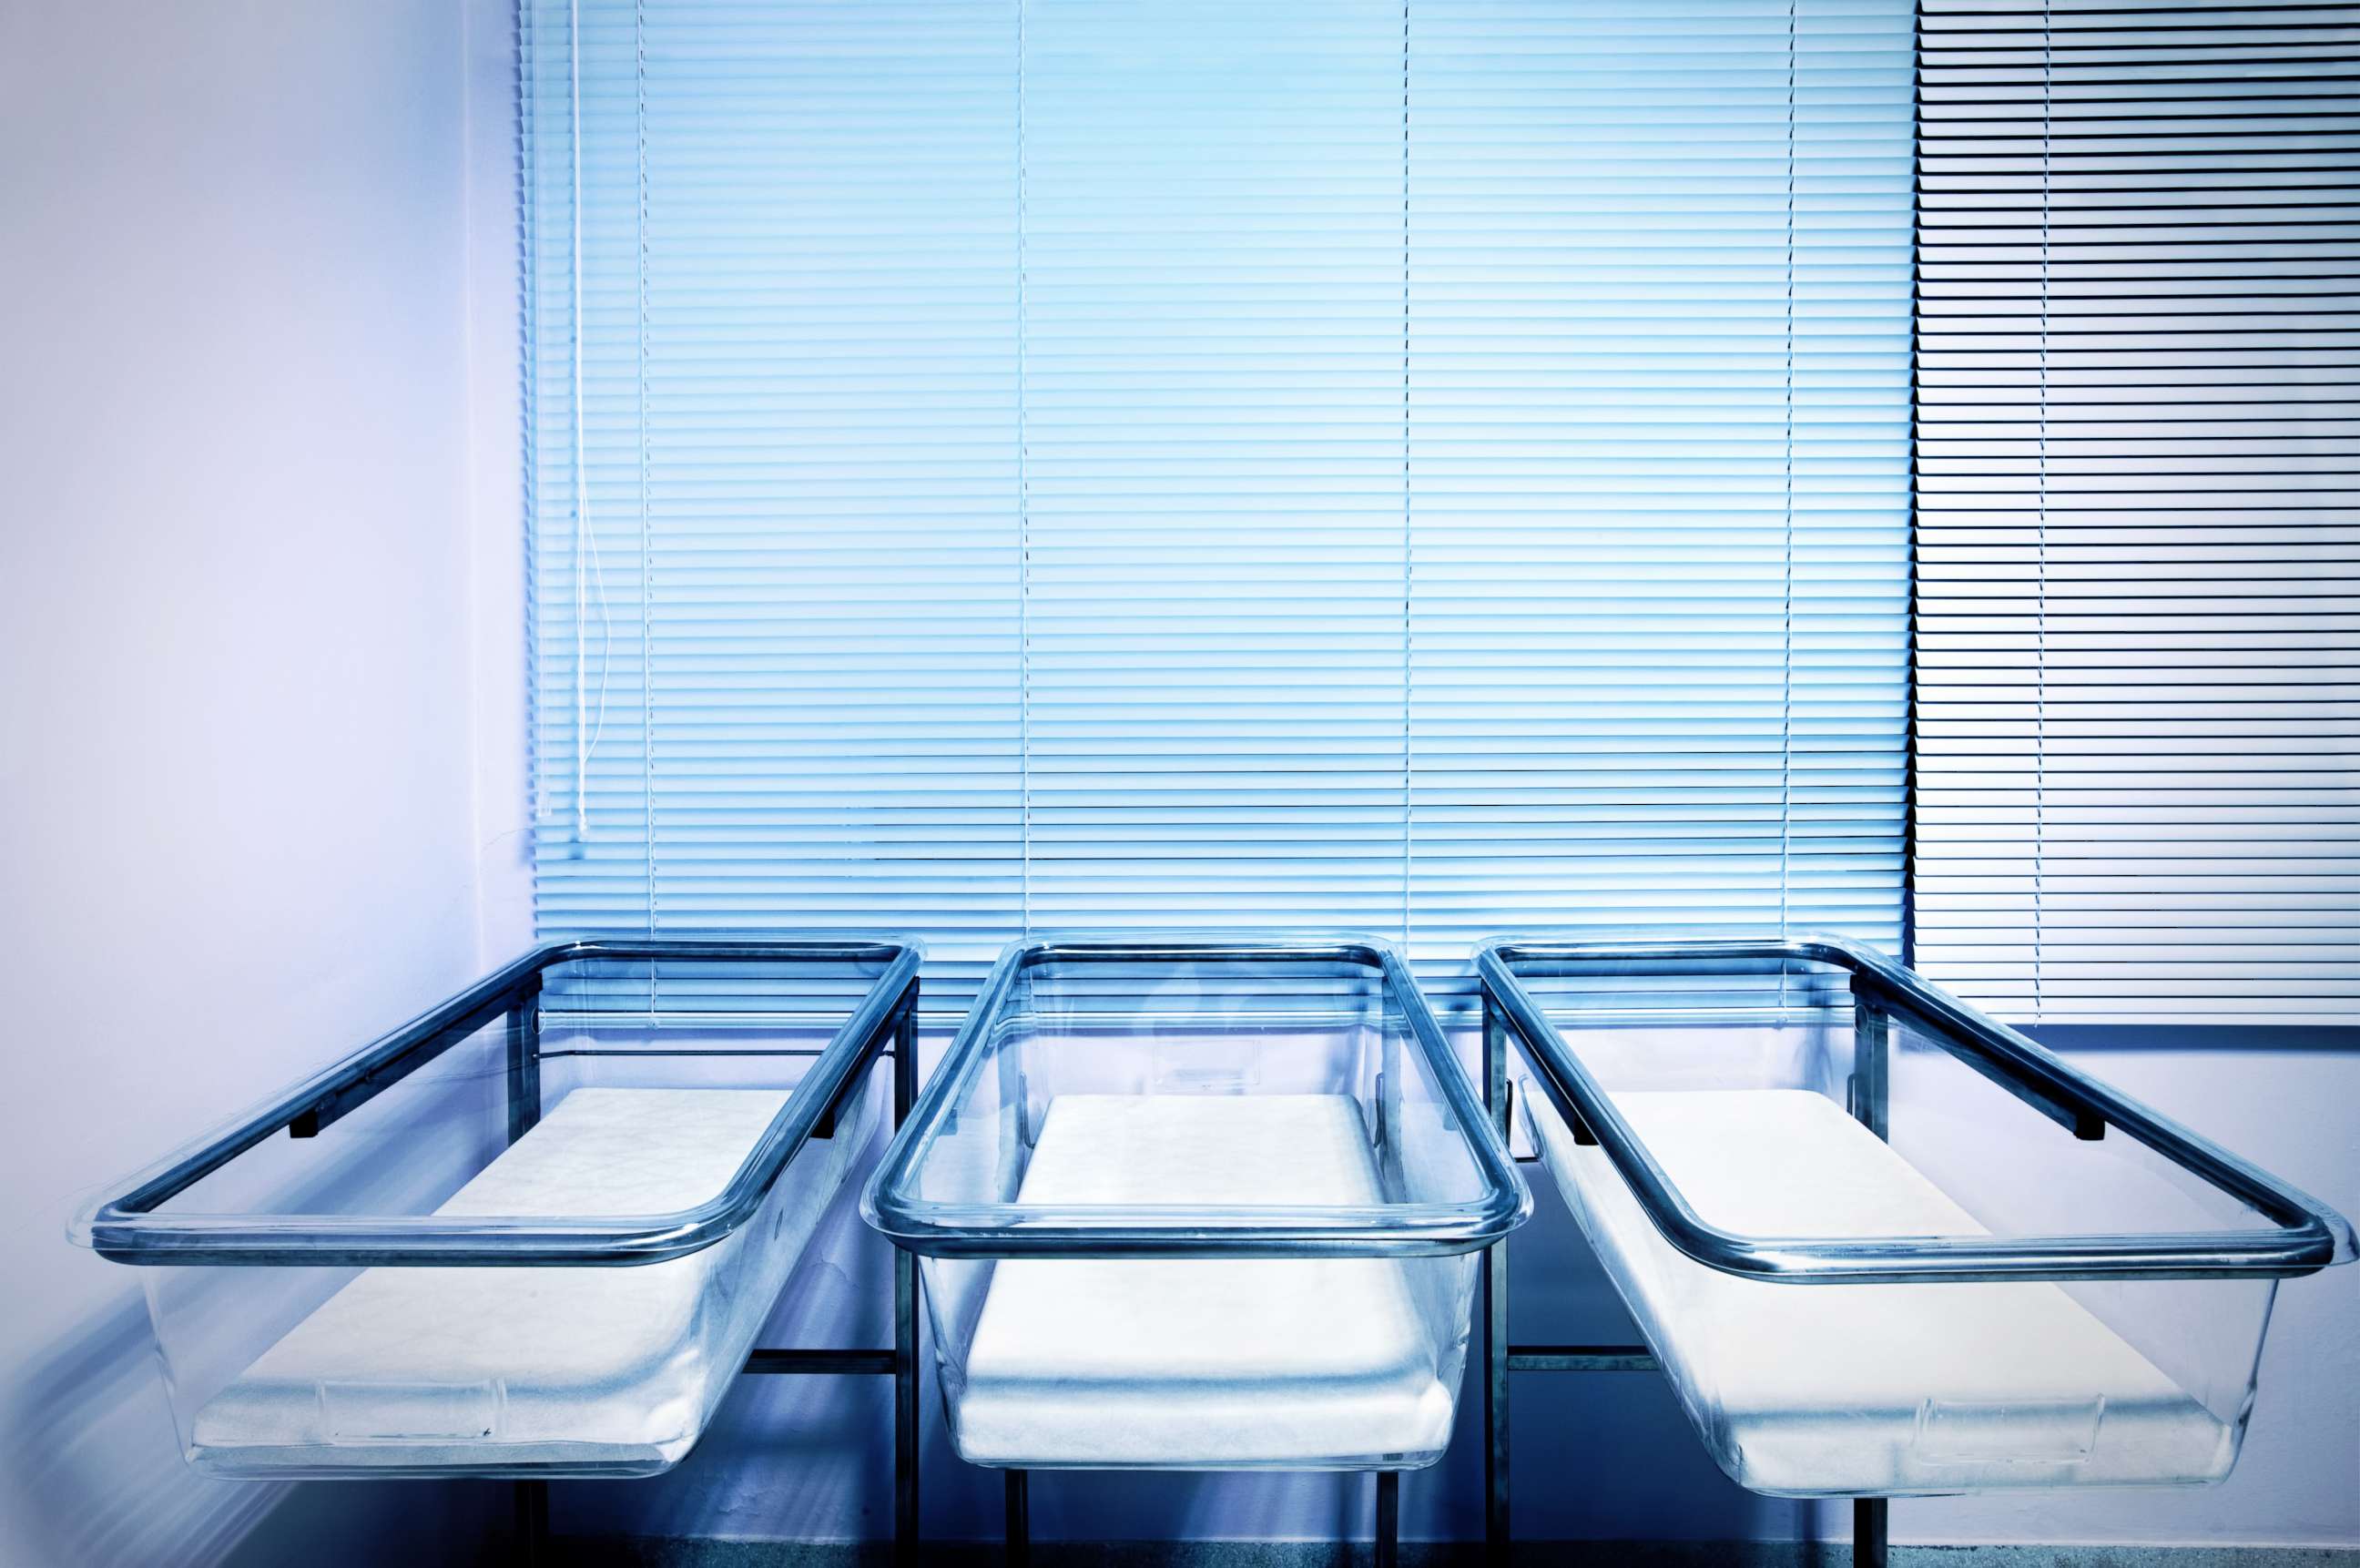 PHOTO: Baby cribs are seen at a maternity ward in this undated stock image.